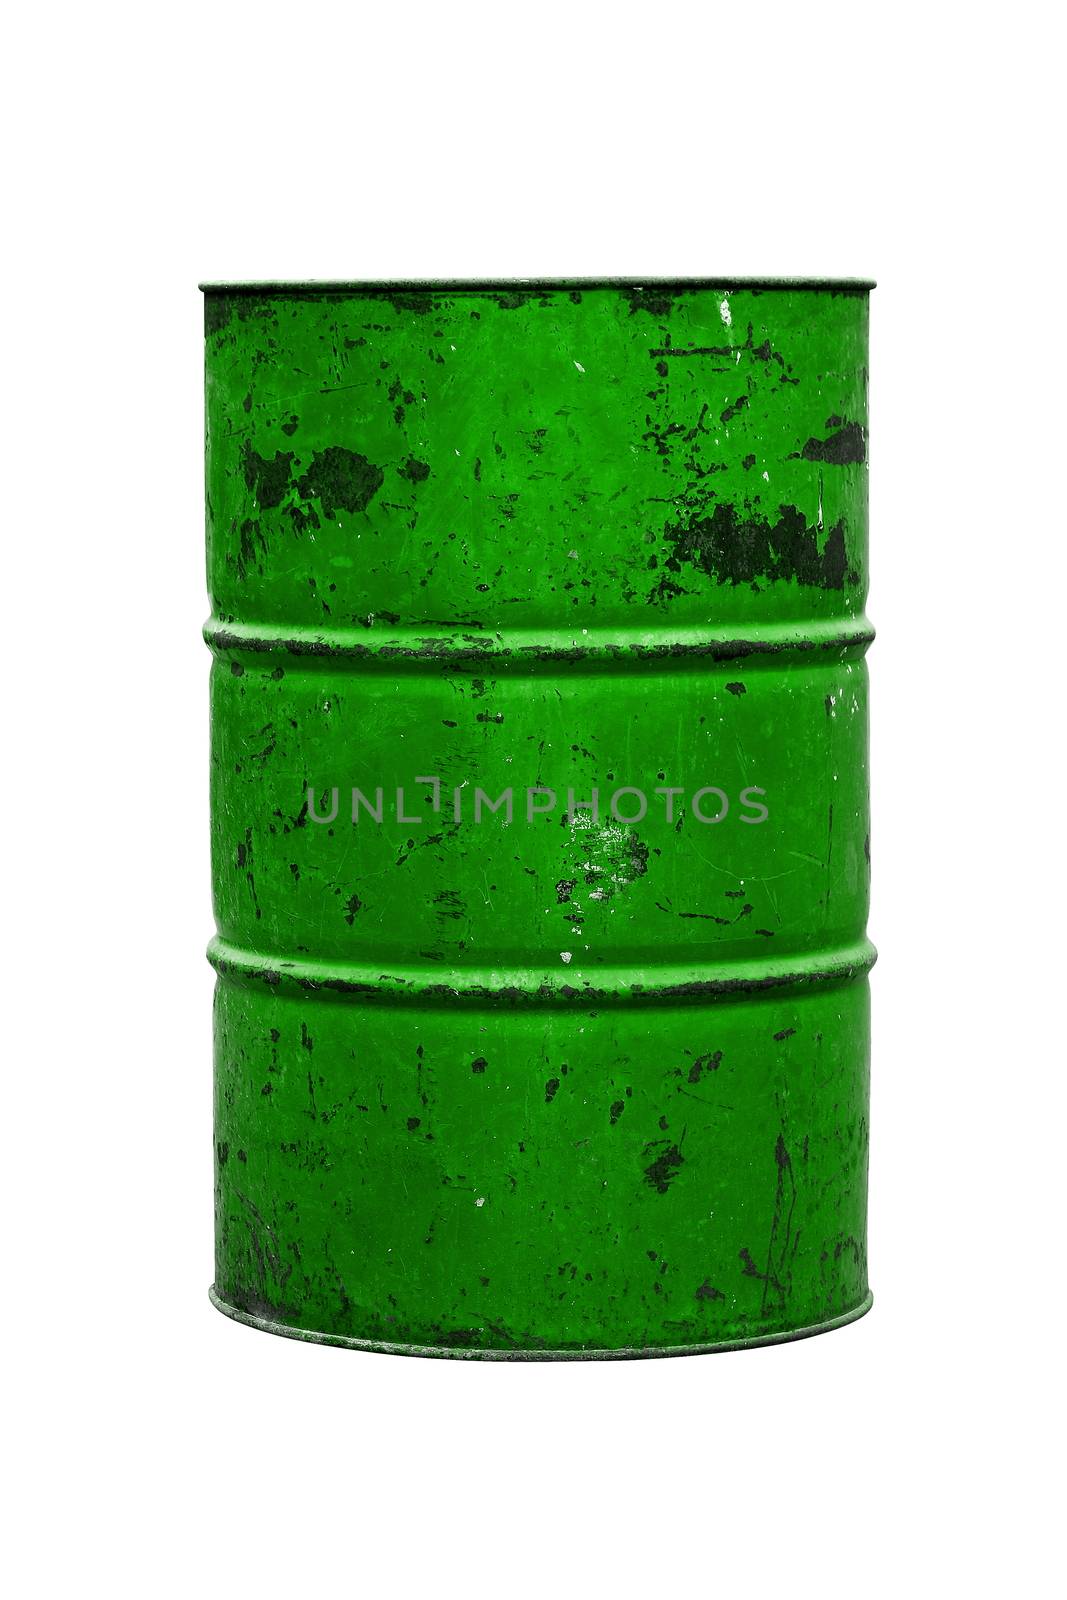 Barrel Oil green Old isolated on background white, bin bag garbage, Bin,Trash, Garbage, Rubbish, by cgdeaw